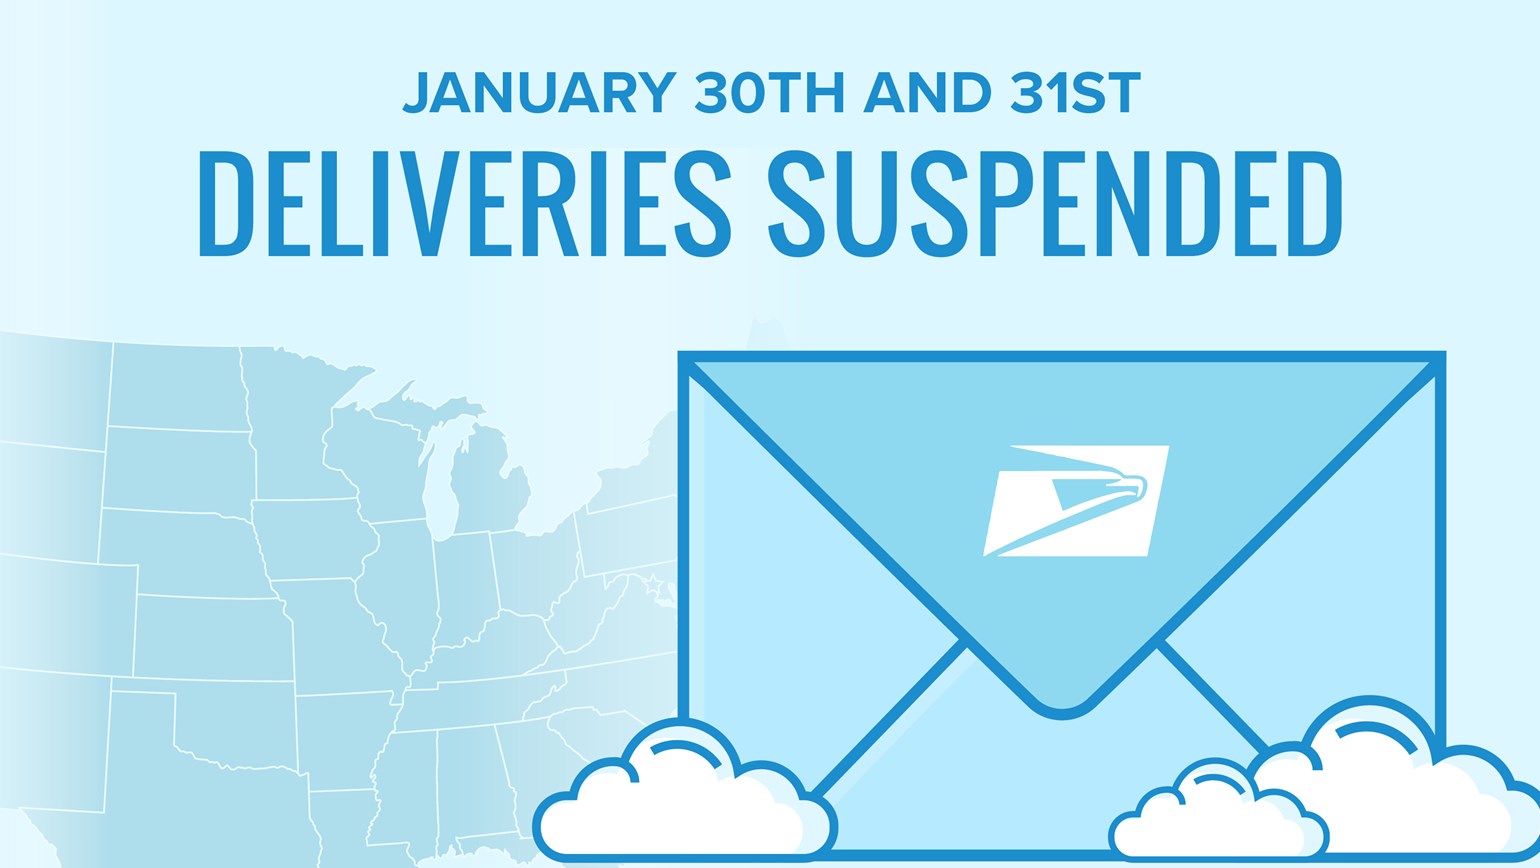 USPS Suspending Deliveries to Parts of the Midwest (1/30-1/31) - How to Handle Impacted Orders